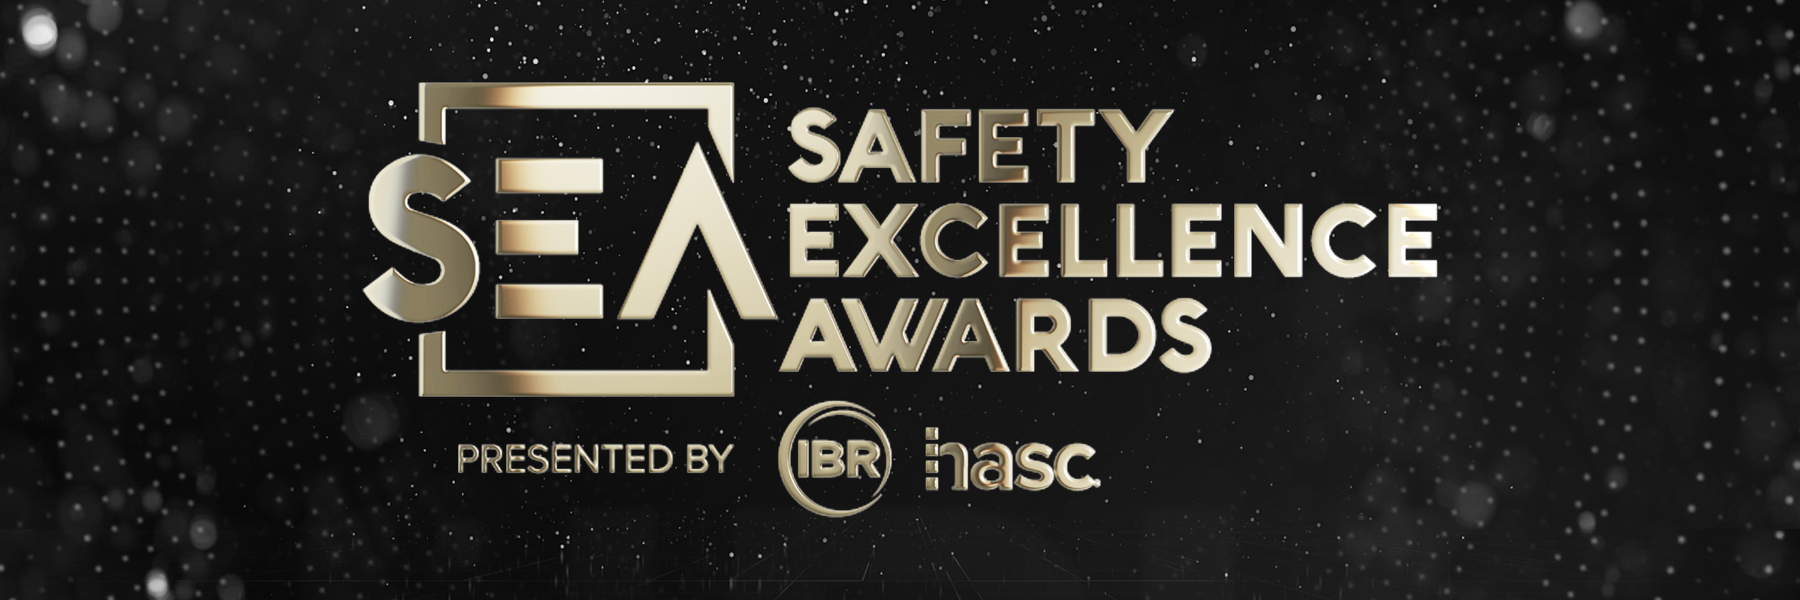 Safety Excellence Awards